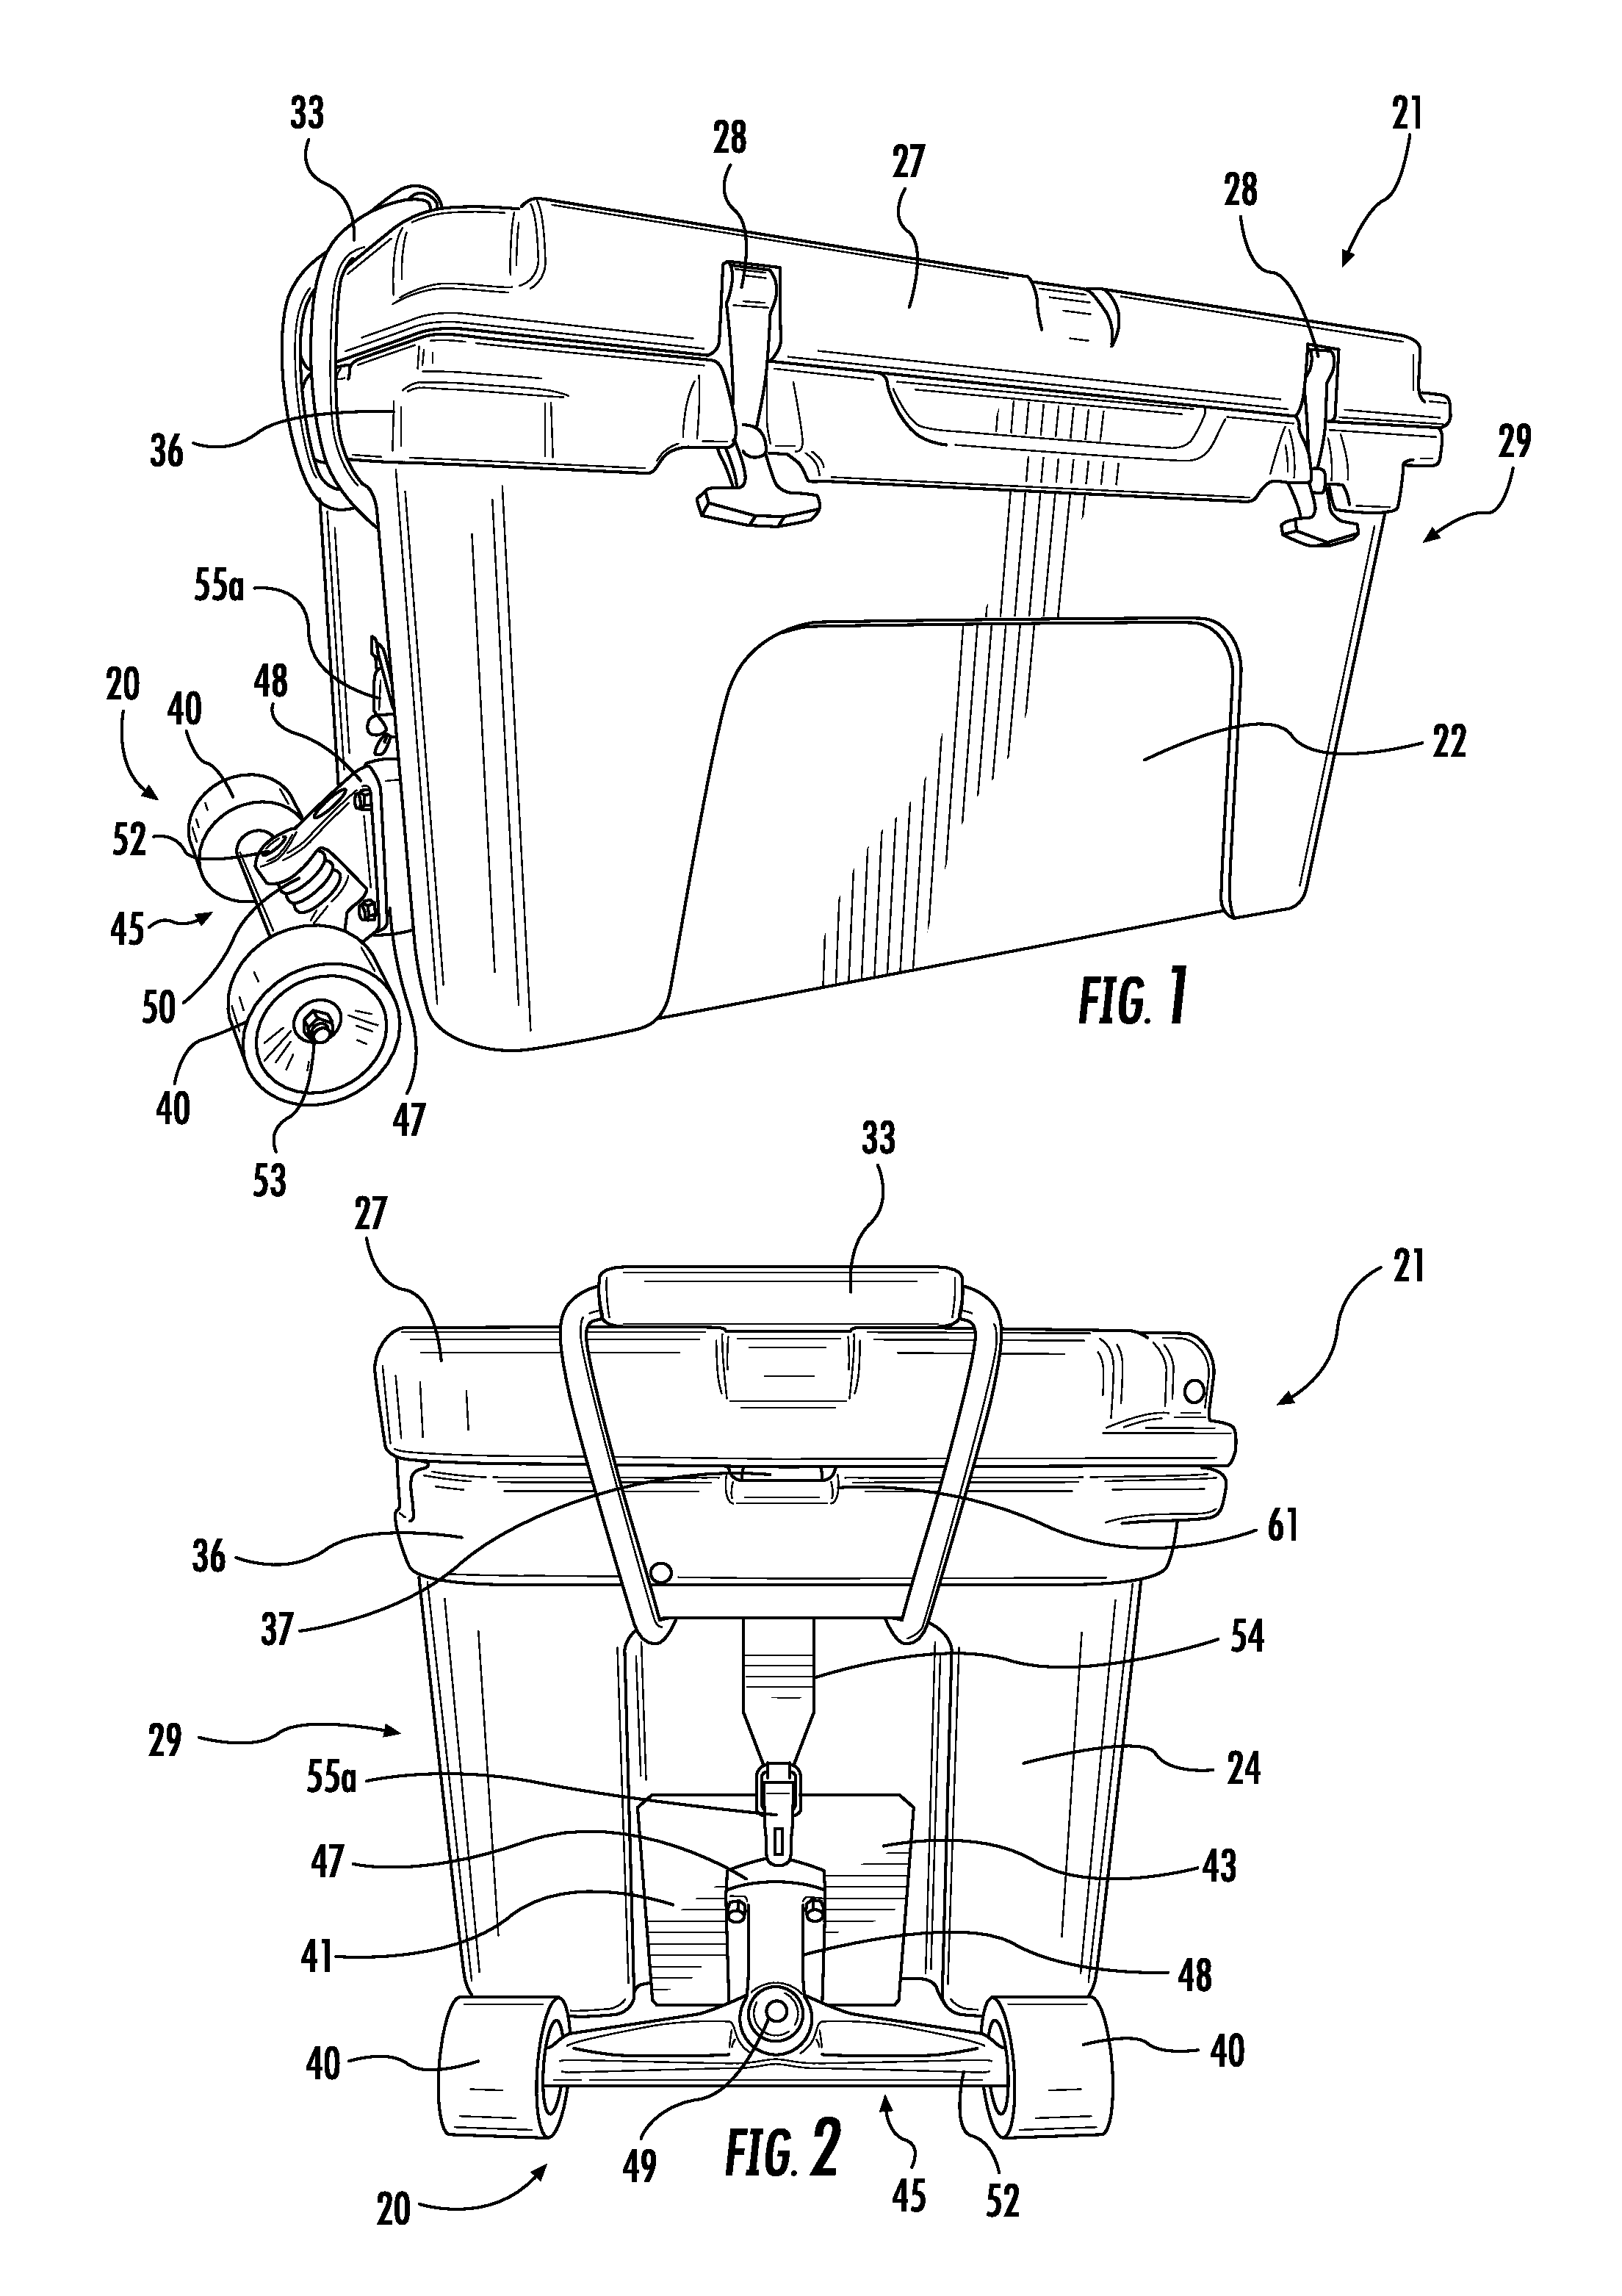 Cooler transporting device